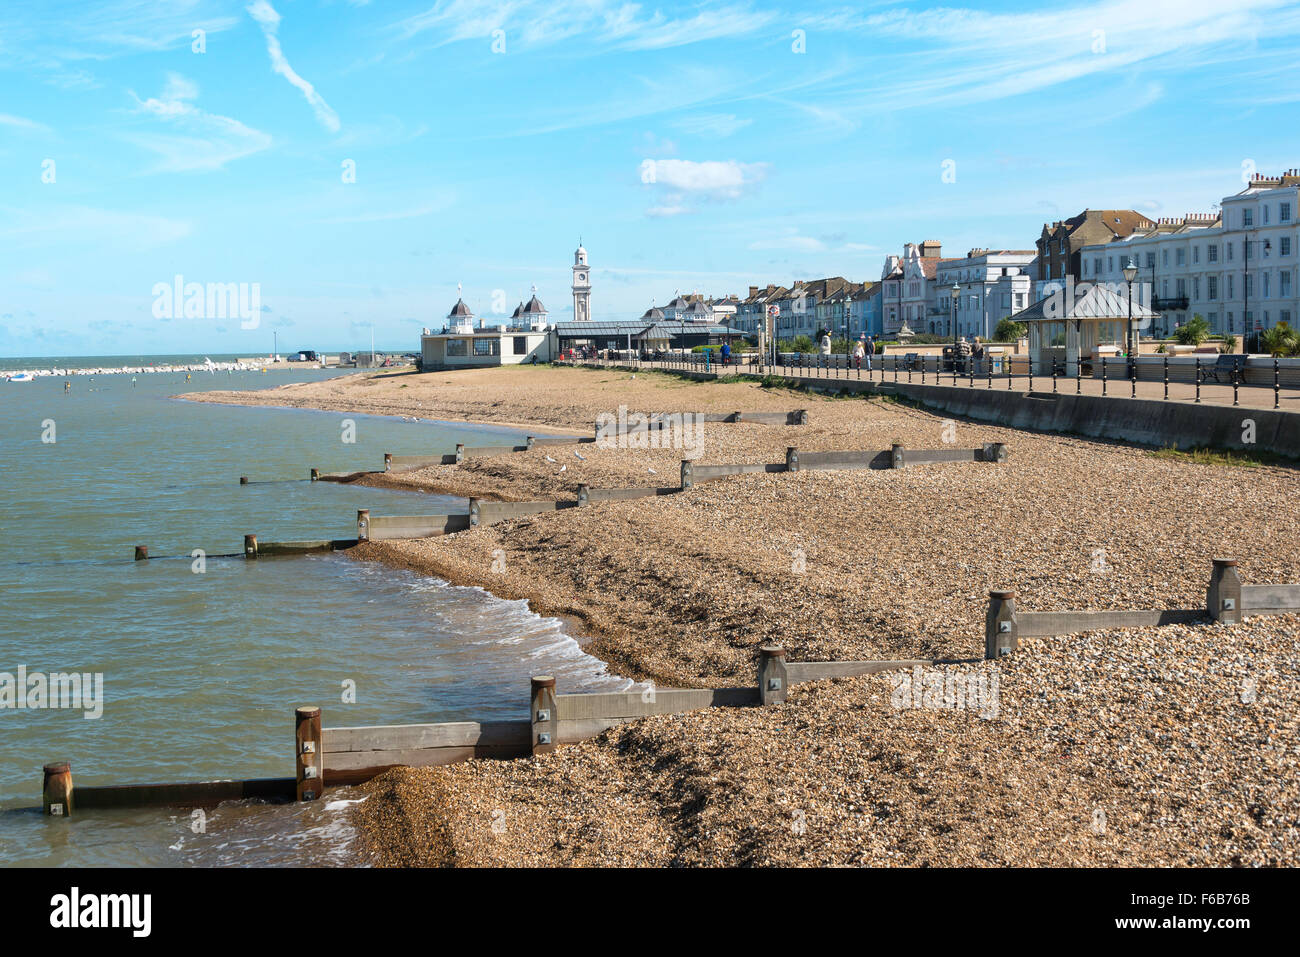 Herne Bay beach and seafront, Herne Bay, Kent, England, United Kingdom Stock Photo